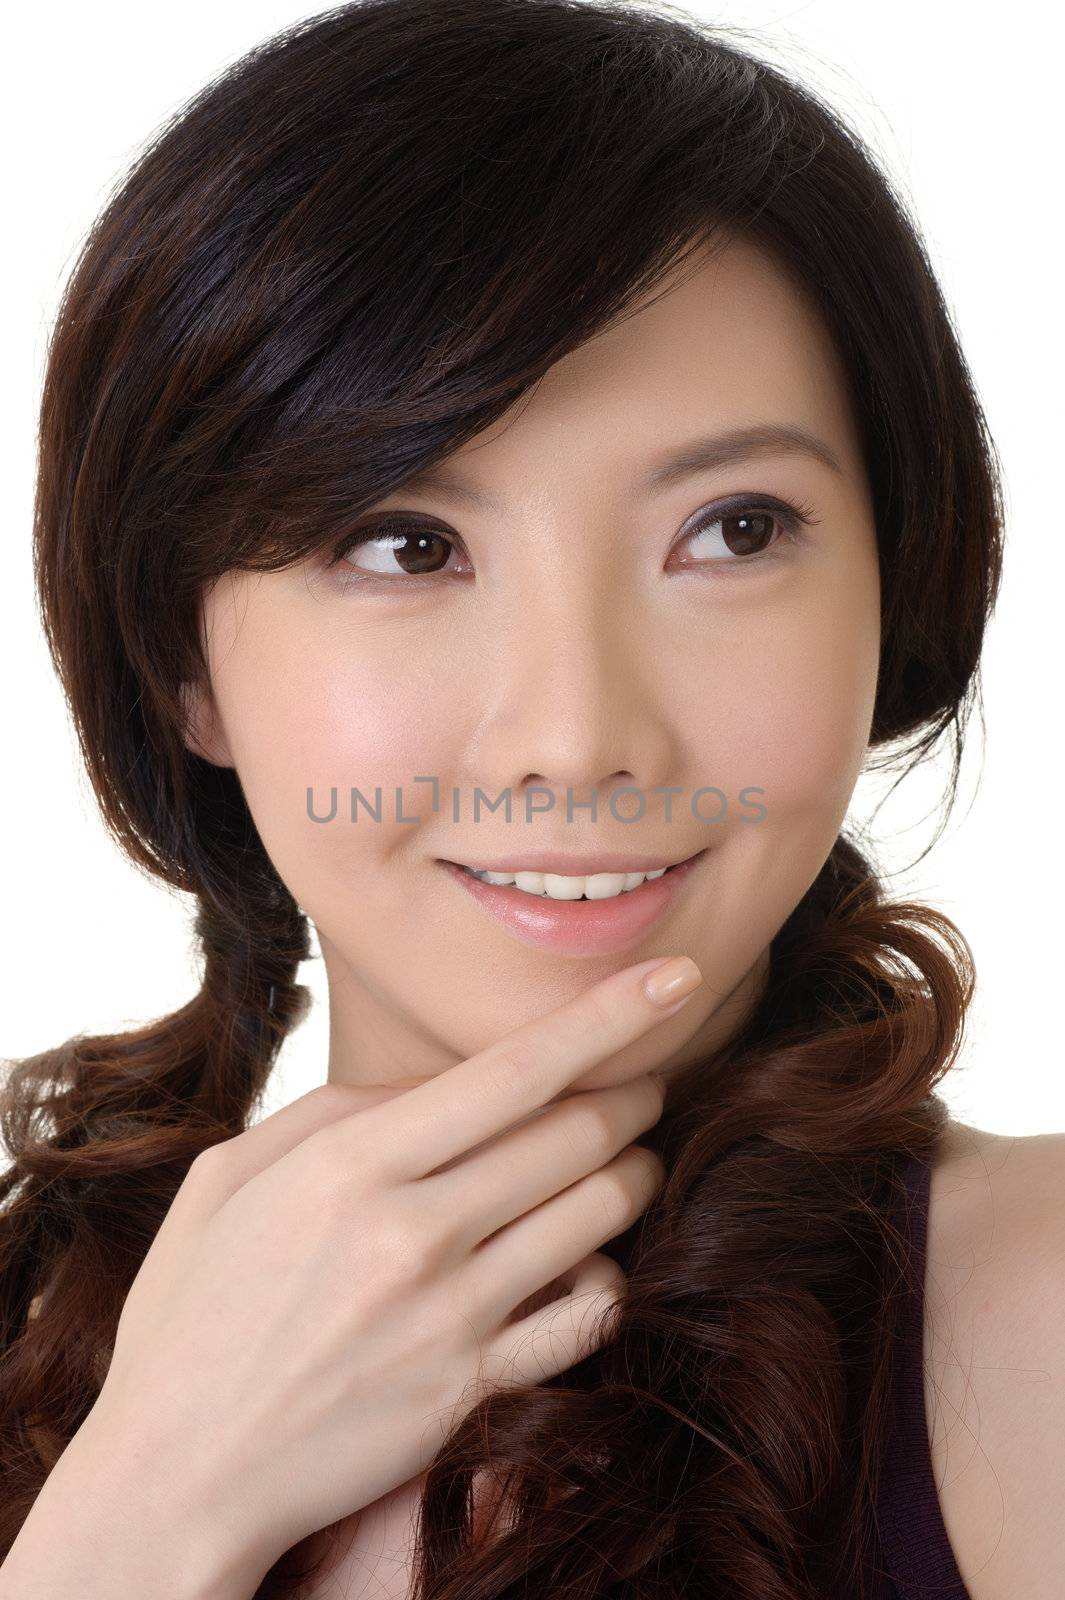 Elegant Asian beauty with smiling expression, closeup portrait.